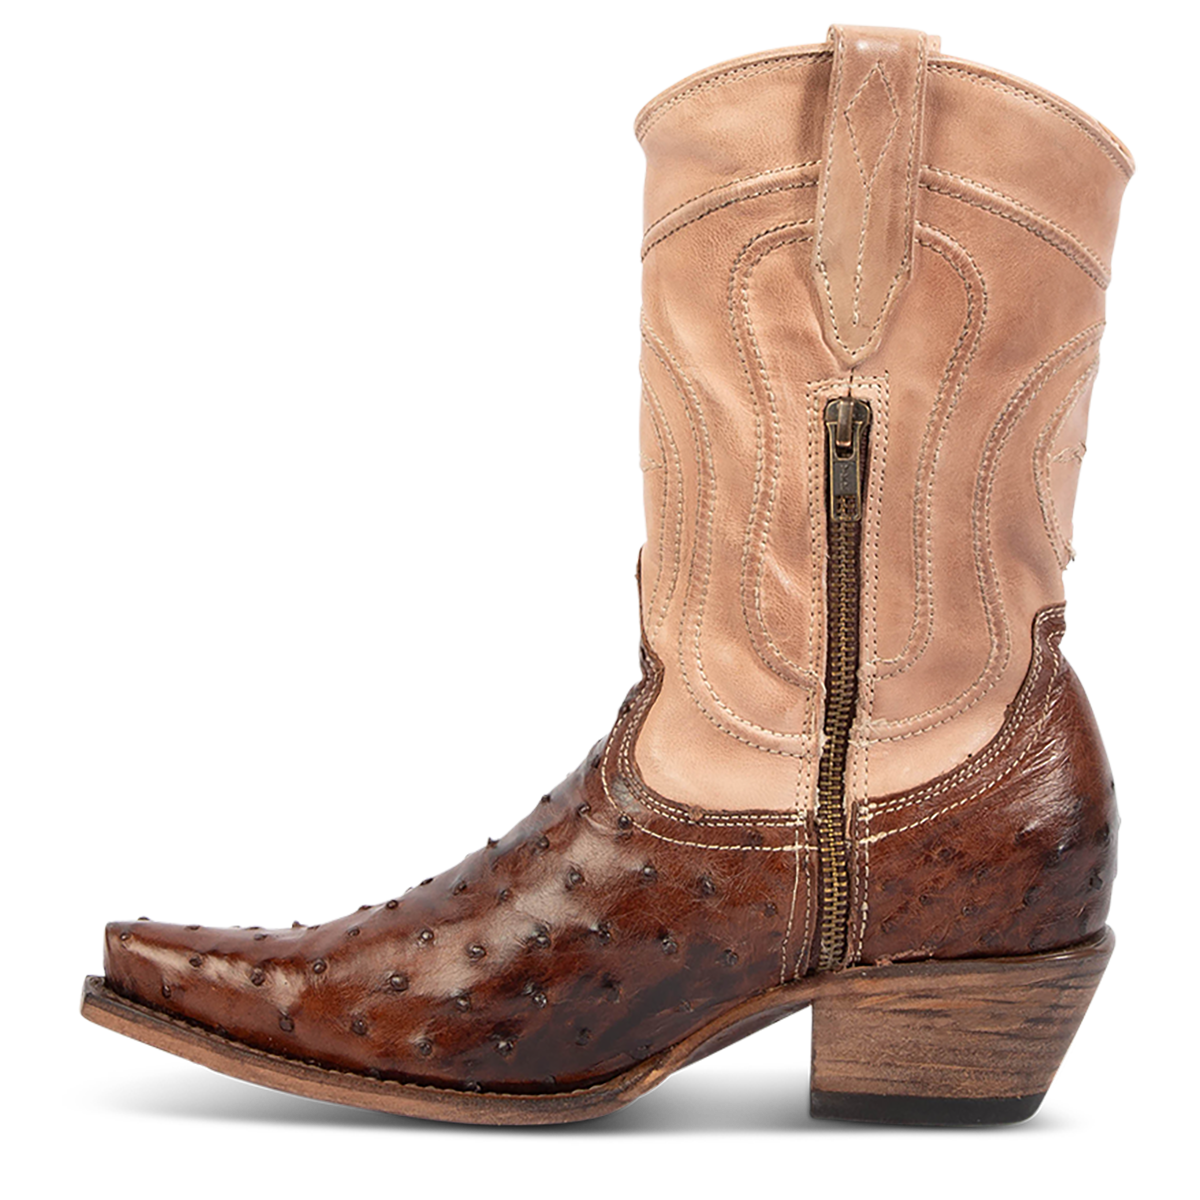 Inside view showing zip closure on FREEBIRD women's Weston brown ostrich multi exotic leather mid calf cowgirl mid calf boot